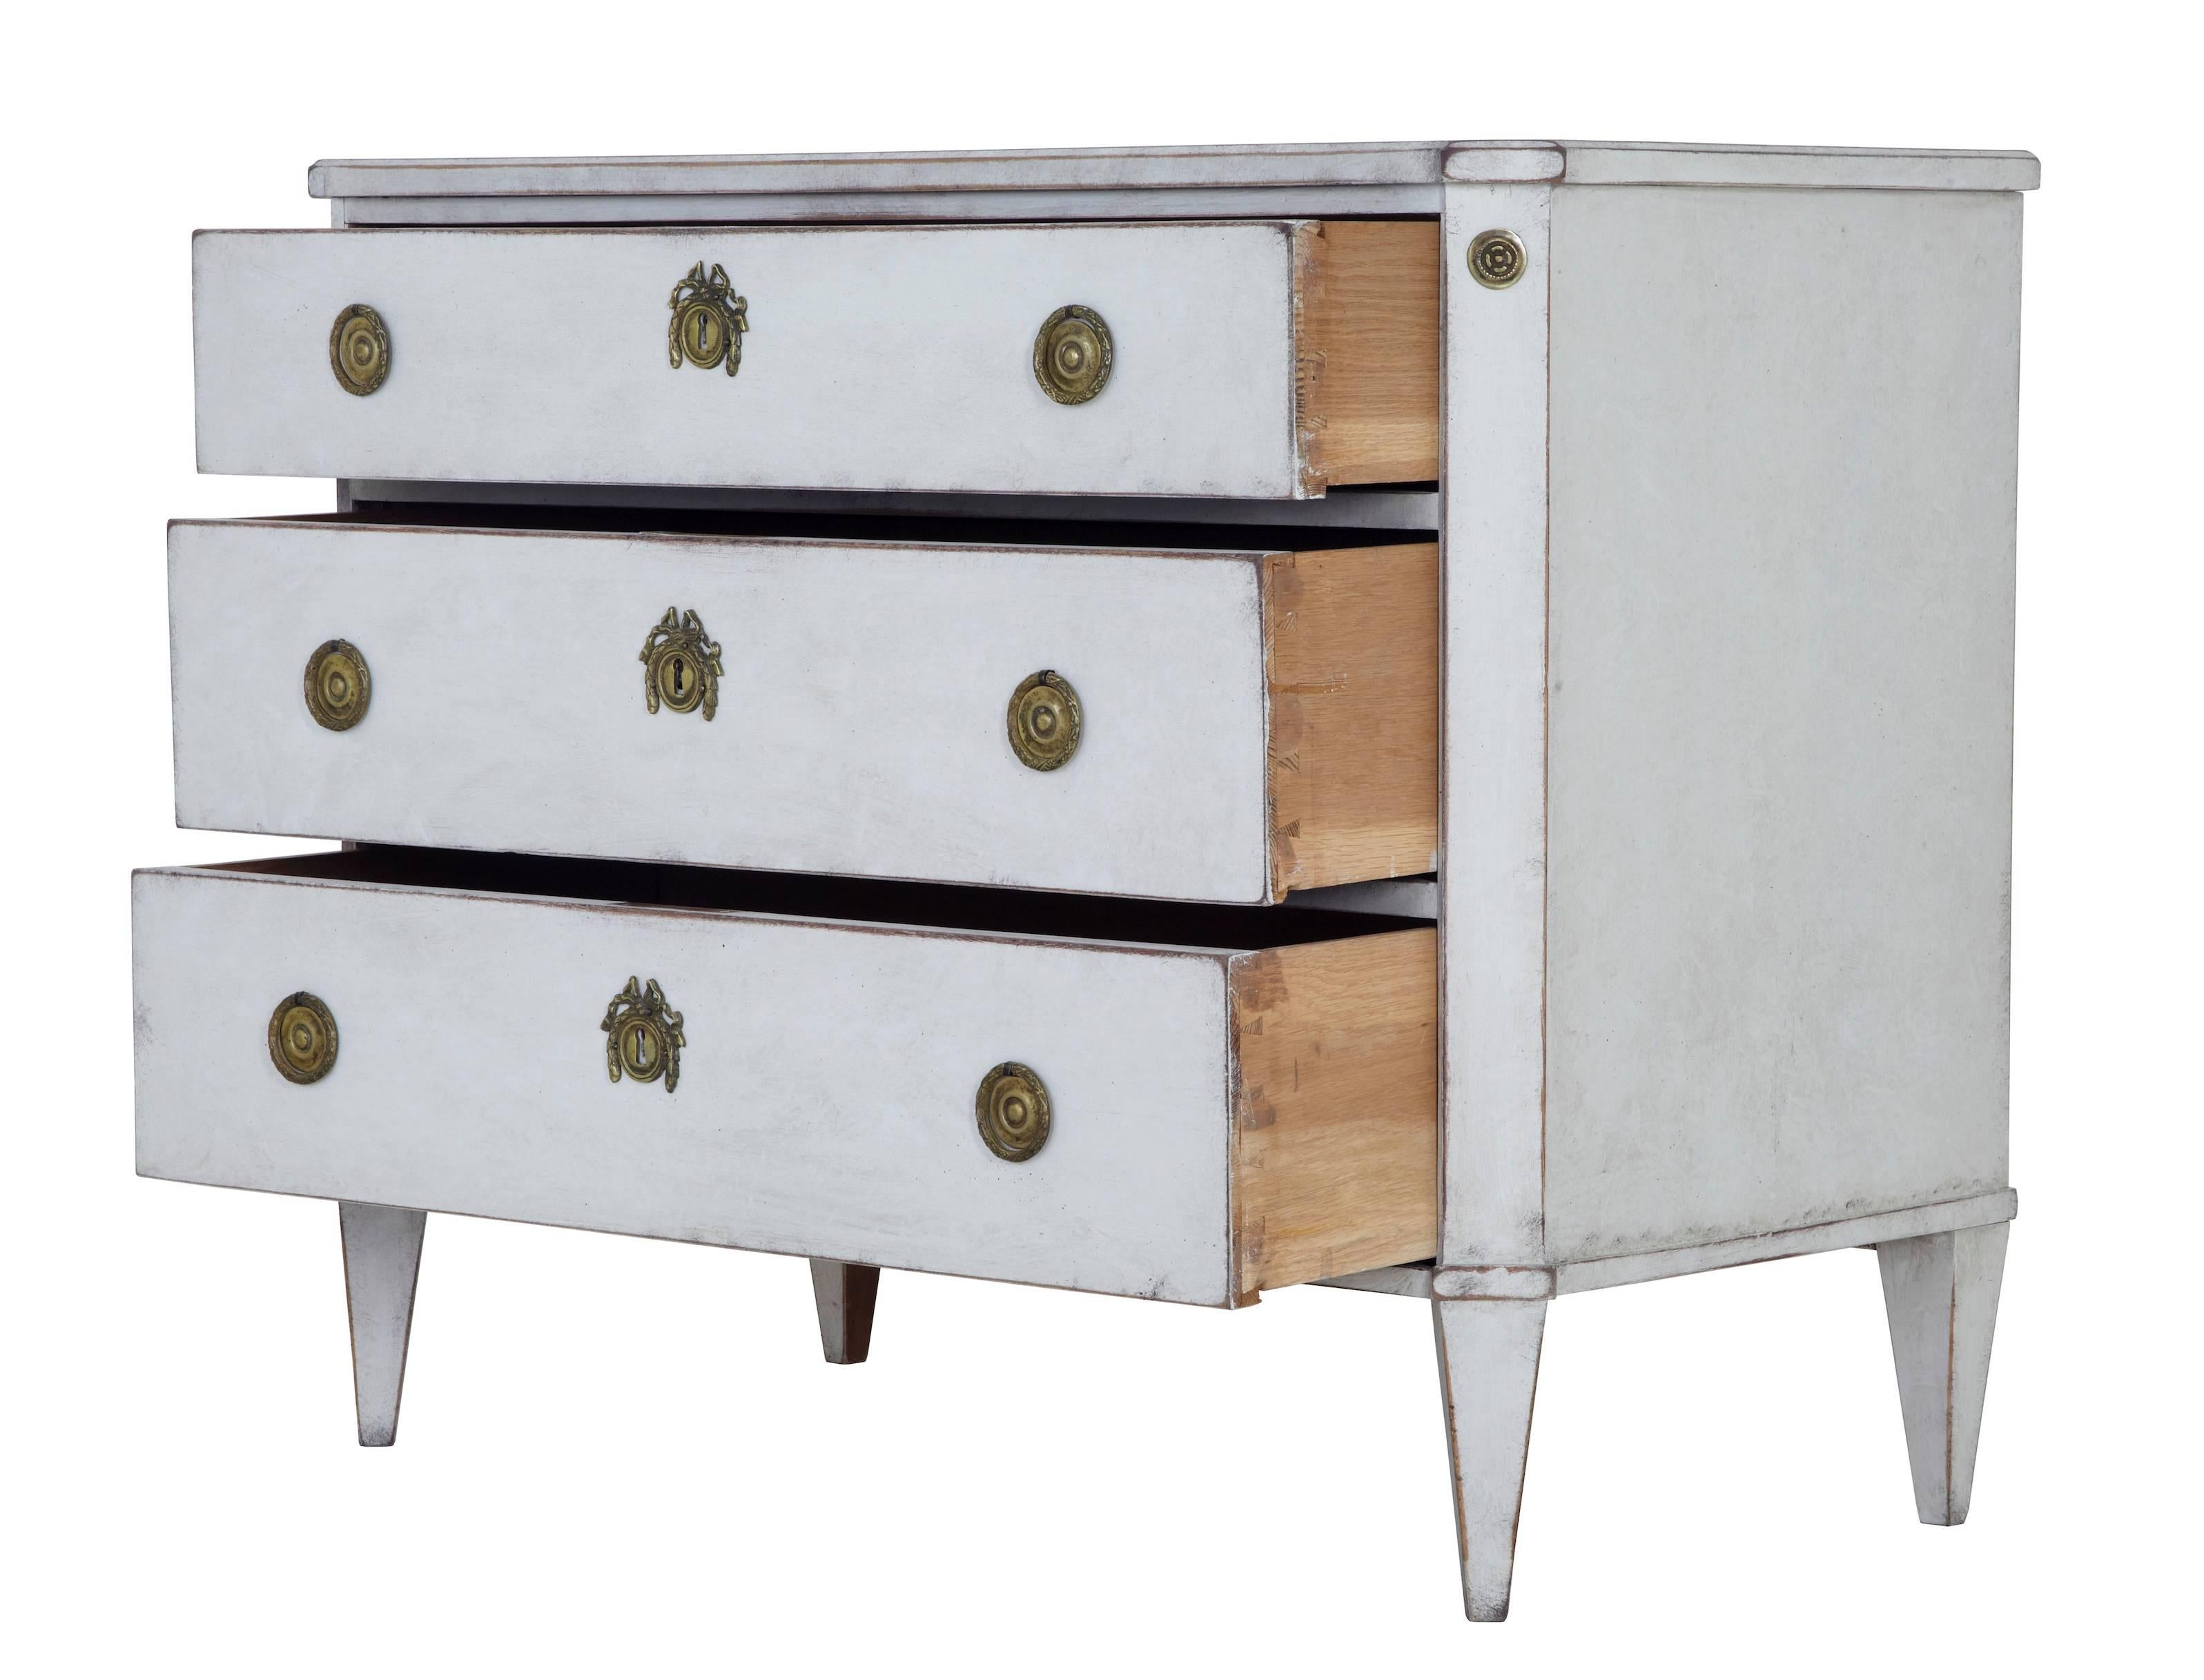 Good quality later painted Swedish chest of drawers, circa 1860.
Three-drawer chest of drawers. Canted corners, standing on tapered legs.

Measures: Height: 31 3/4",
width: 38 1/4",
depth: 20".